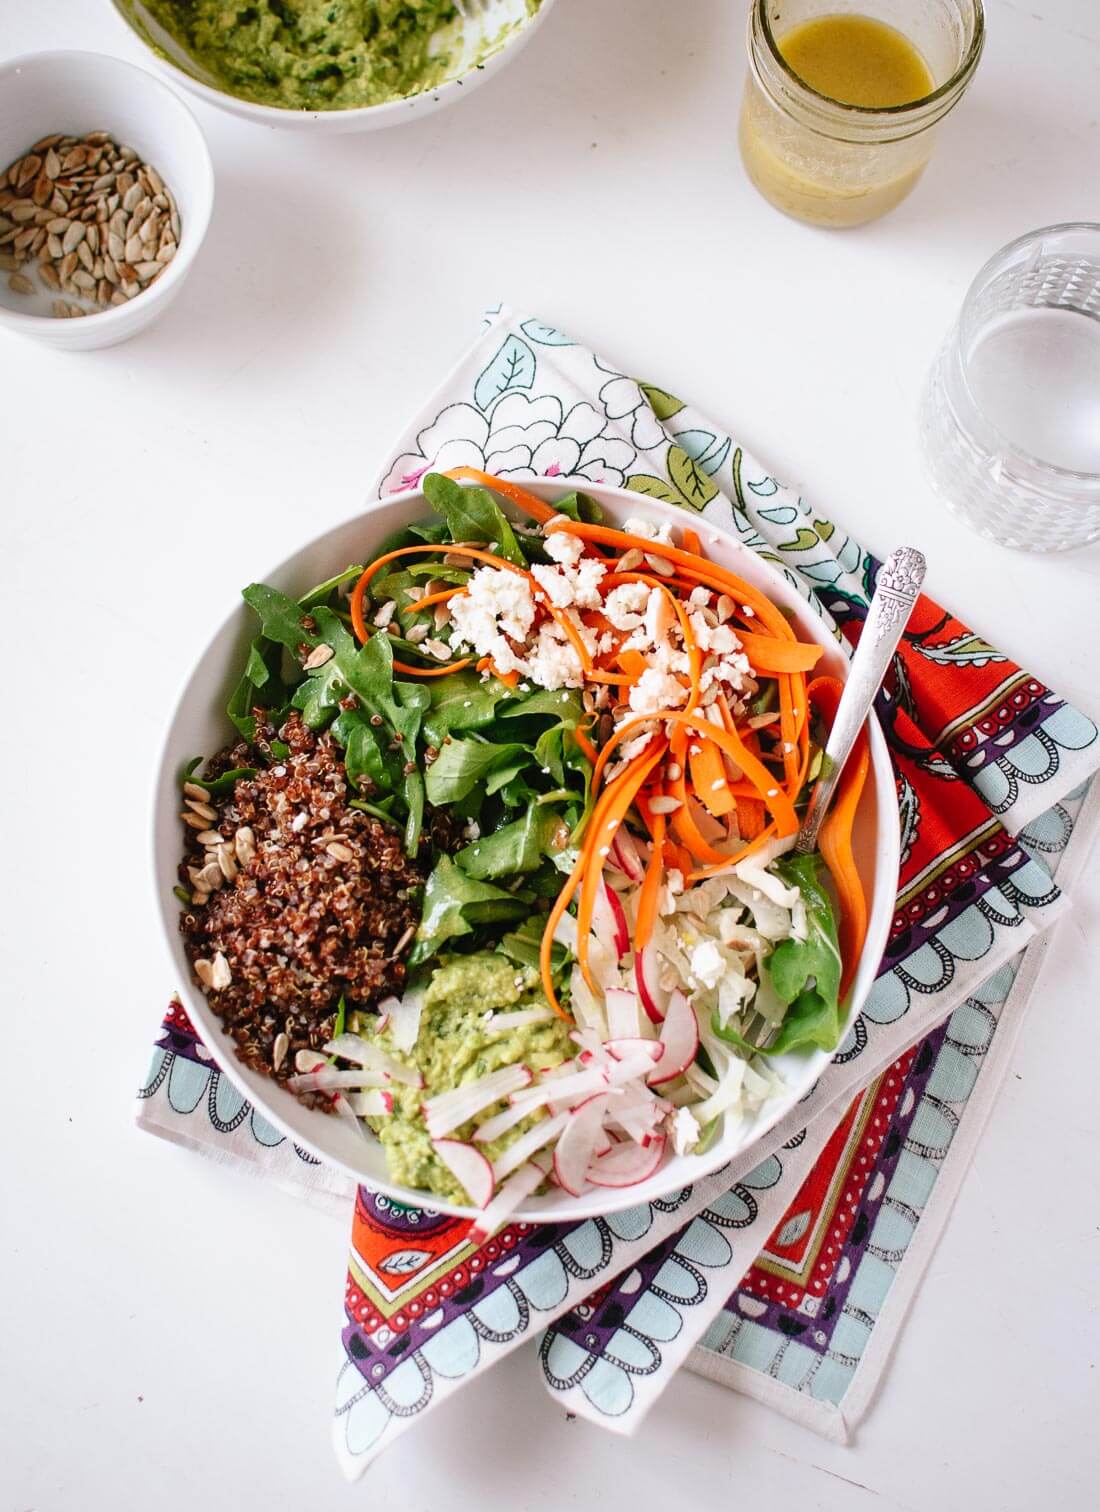 This delicious and hearty salad features arugula, carrots, quinoa and avocado - cookieandkate.com